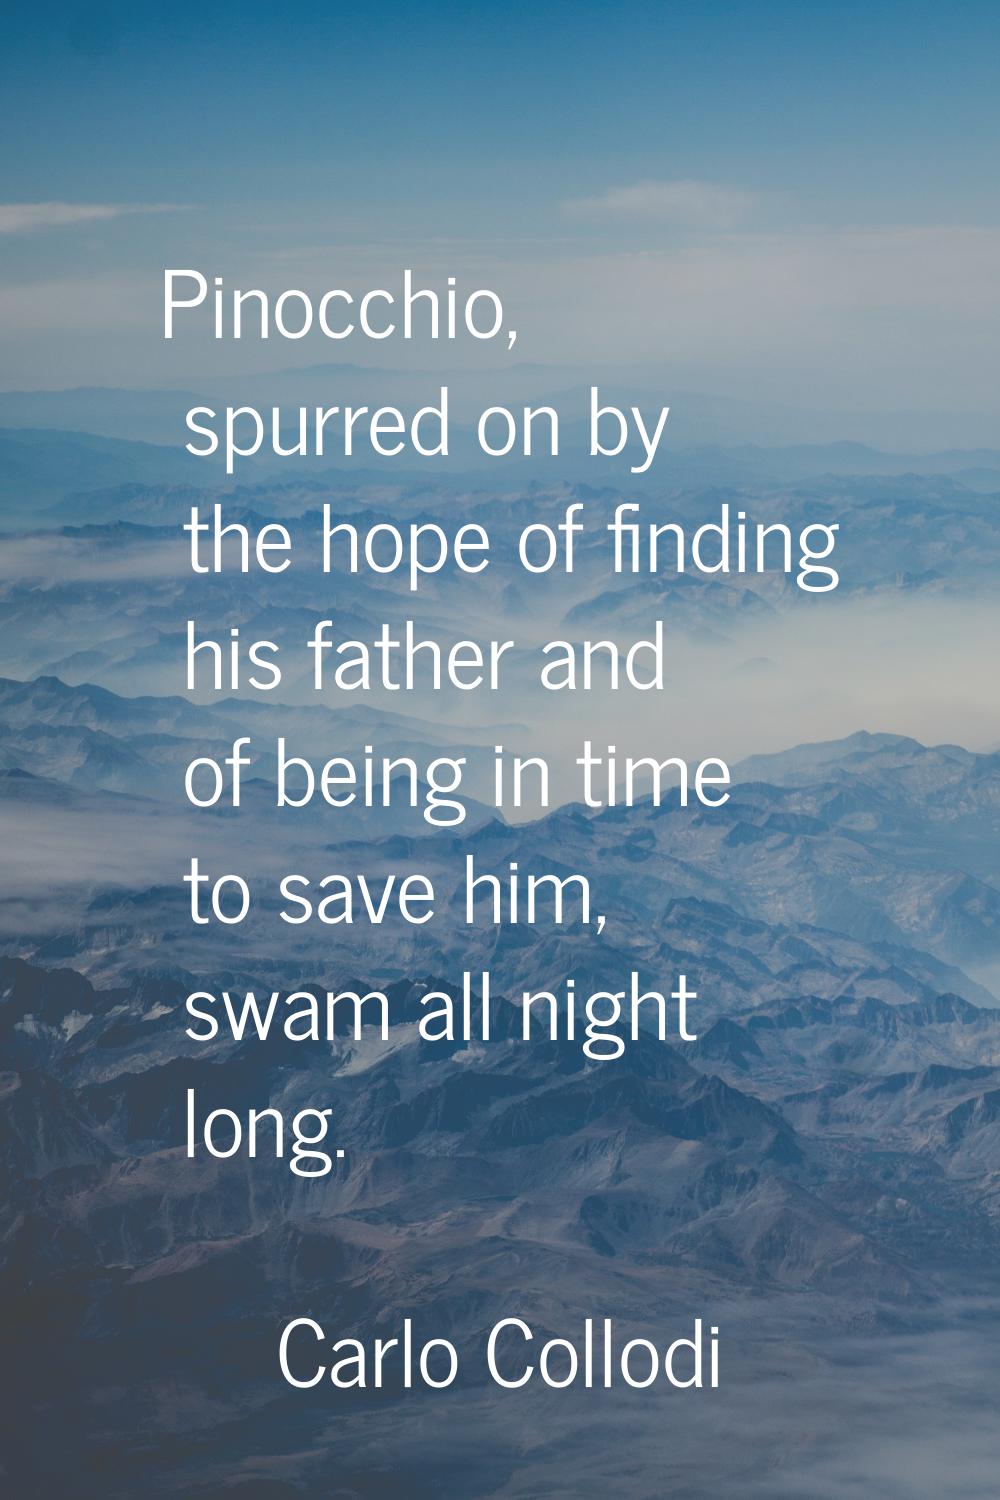 Pinocchio, spurred on by the hope of finding his father and of being in time to save him, swam all 